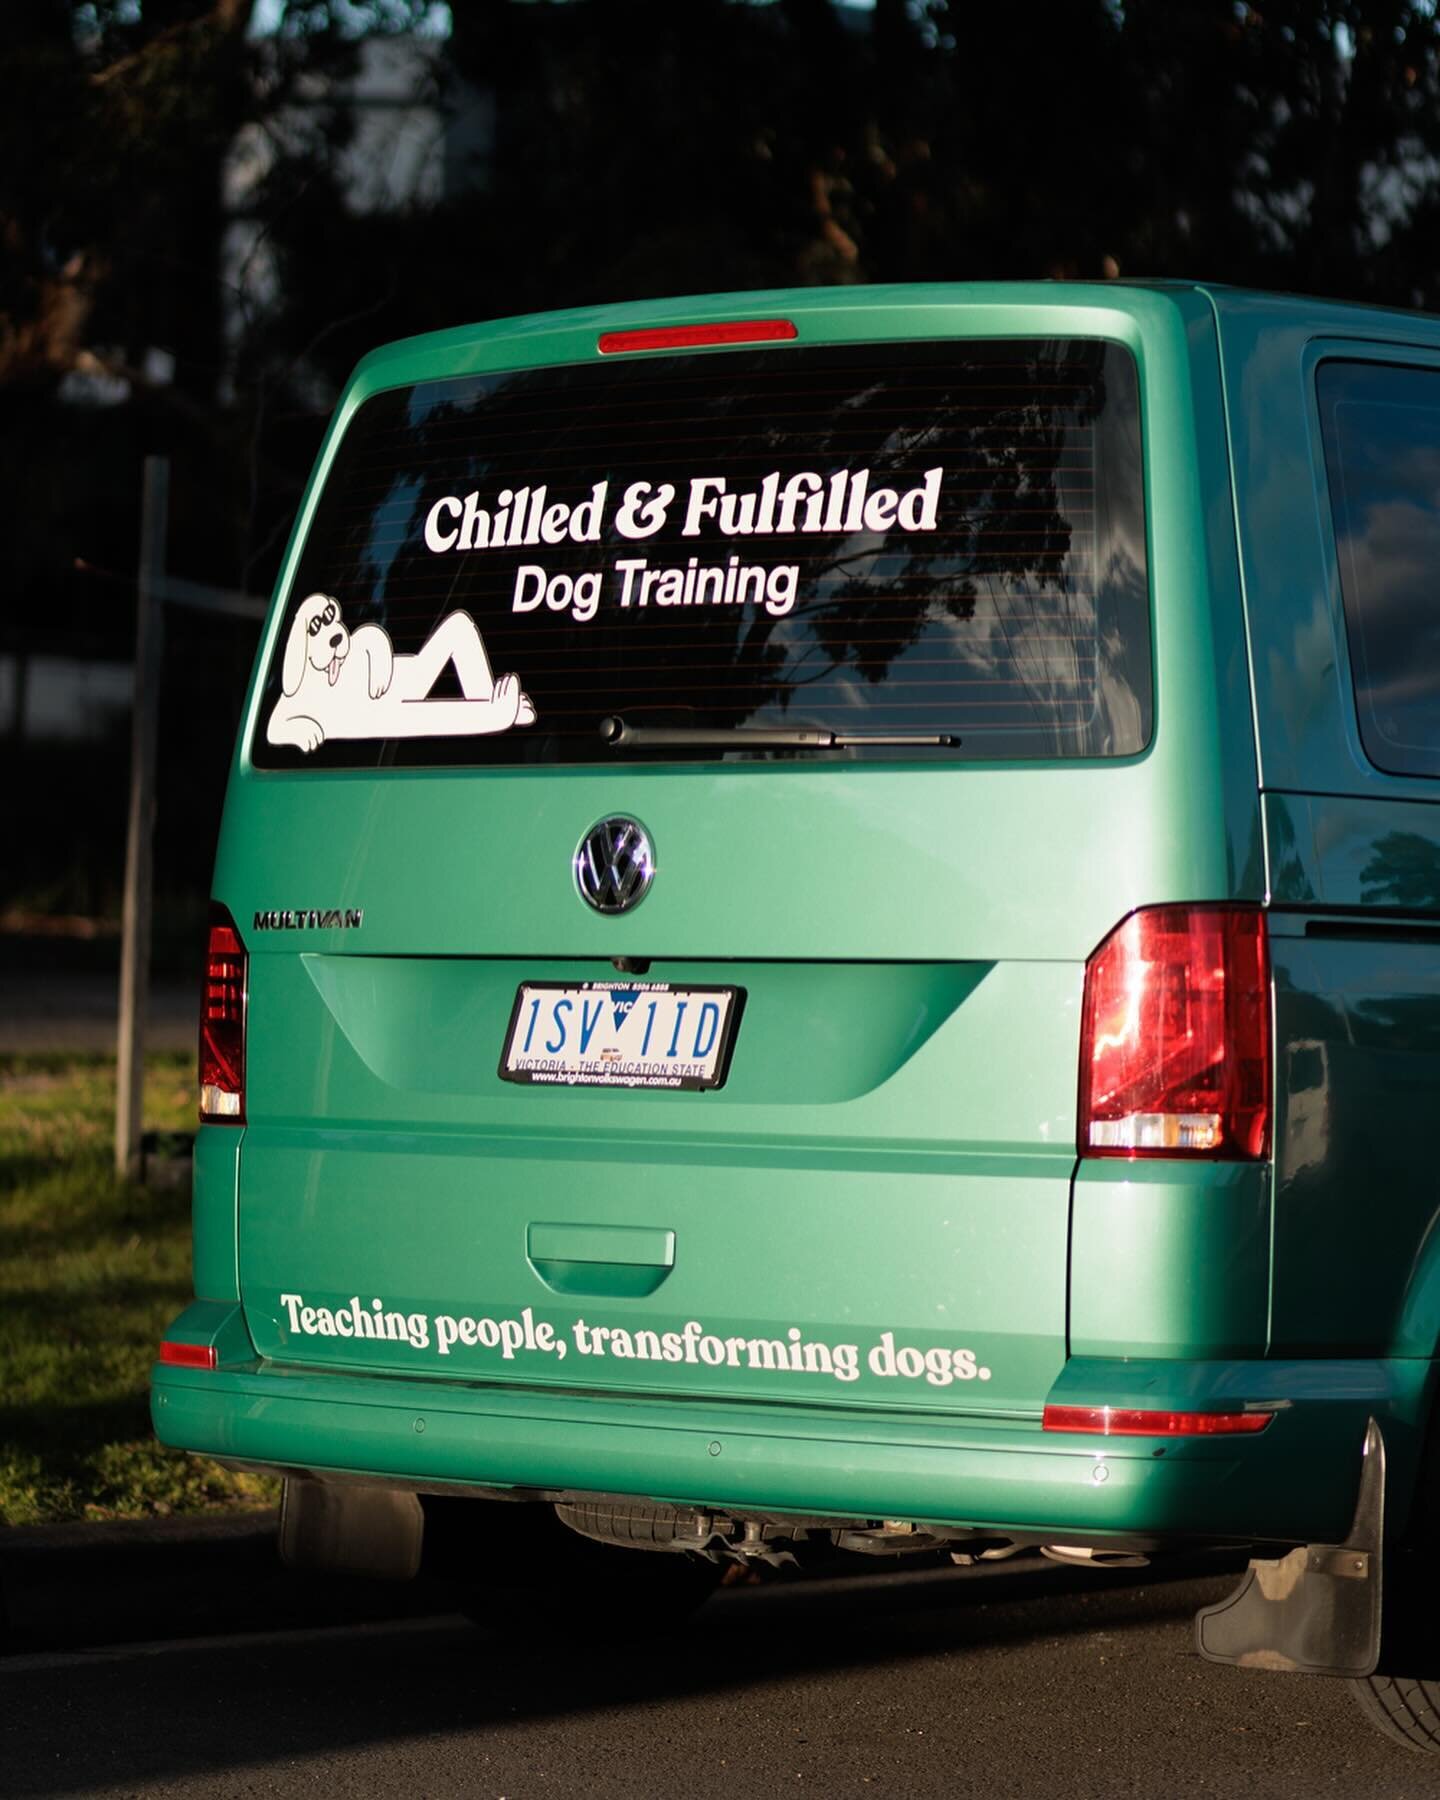 If you have hot 🔥 branding then cover your van 🚐 with it! 

Dog trainer @chilledandfulfilled is on the road between Melbourne and the Northern Rivers. Honk if you see him. 🐶 

Thanks for printing and sticking these decals on @allaboutgraphics 

Ph